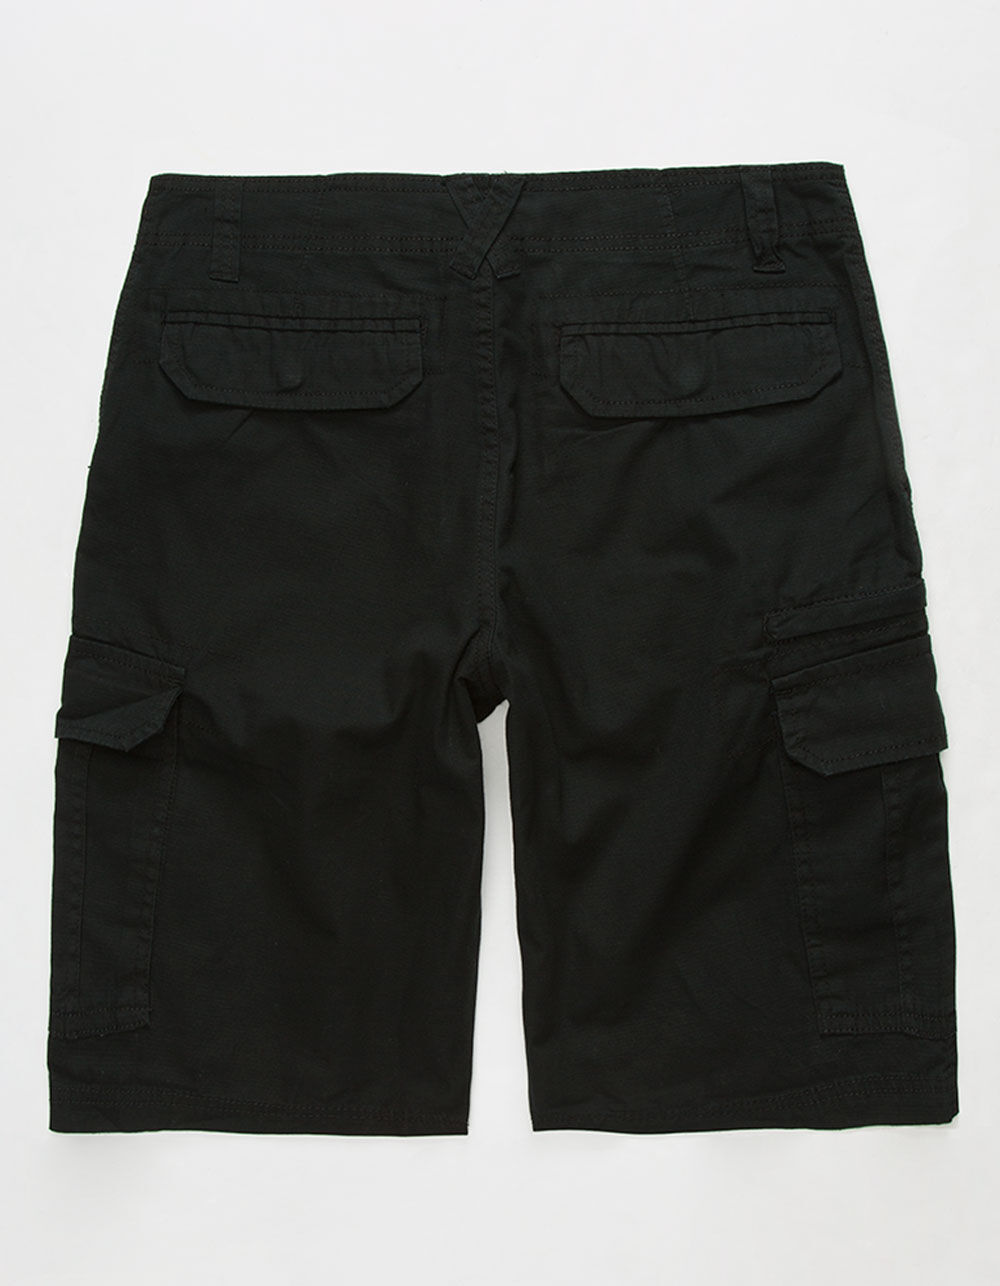 SUBCULTURE Textured Mens Cargo Shorts